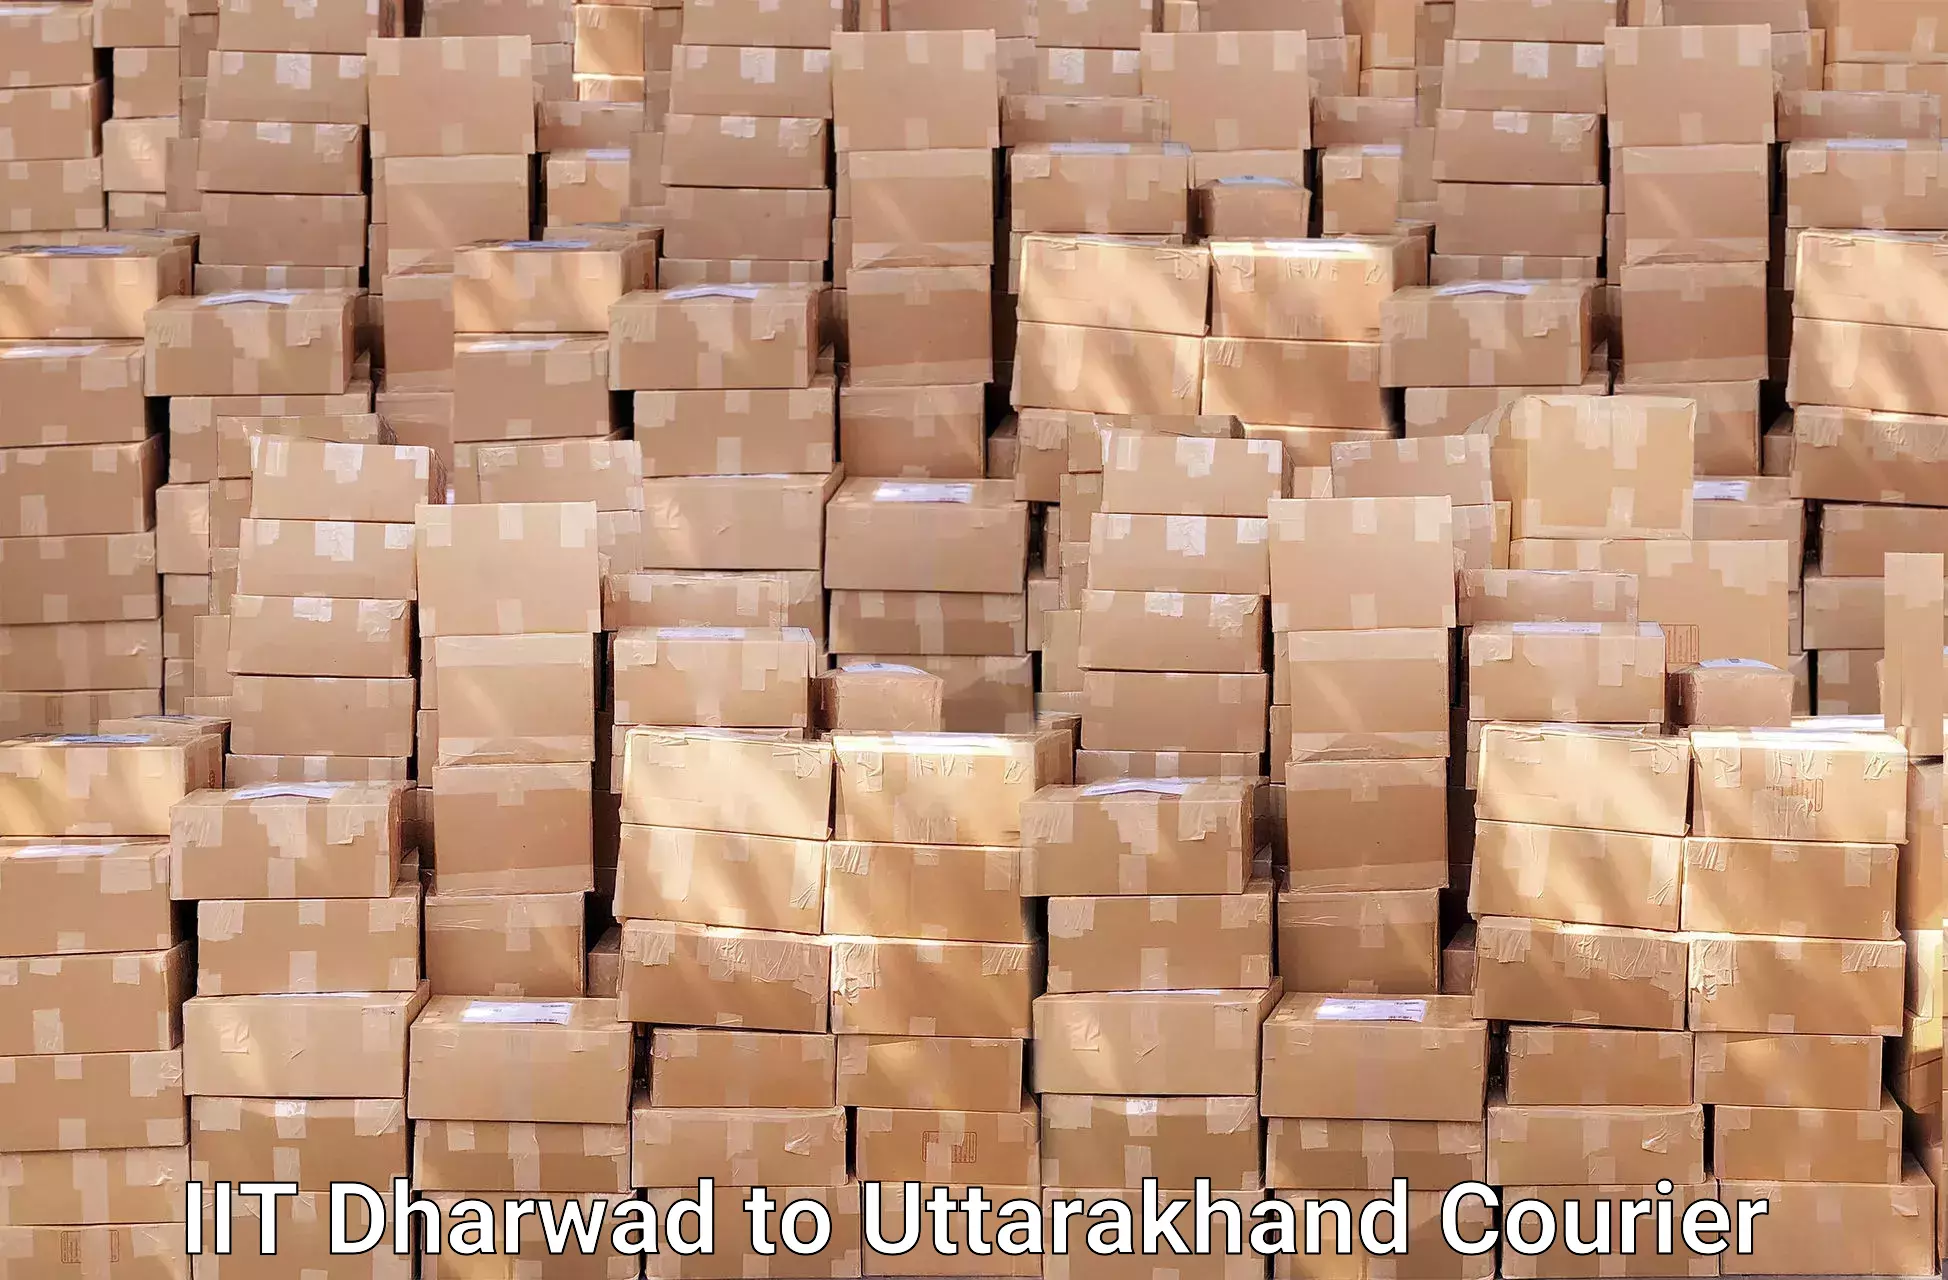 Professional packing and transport in IIT Dharwad to Pithoragarh